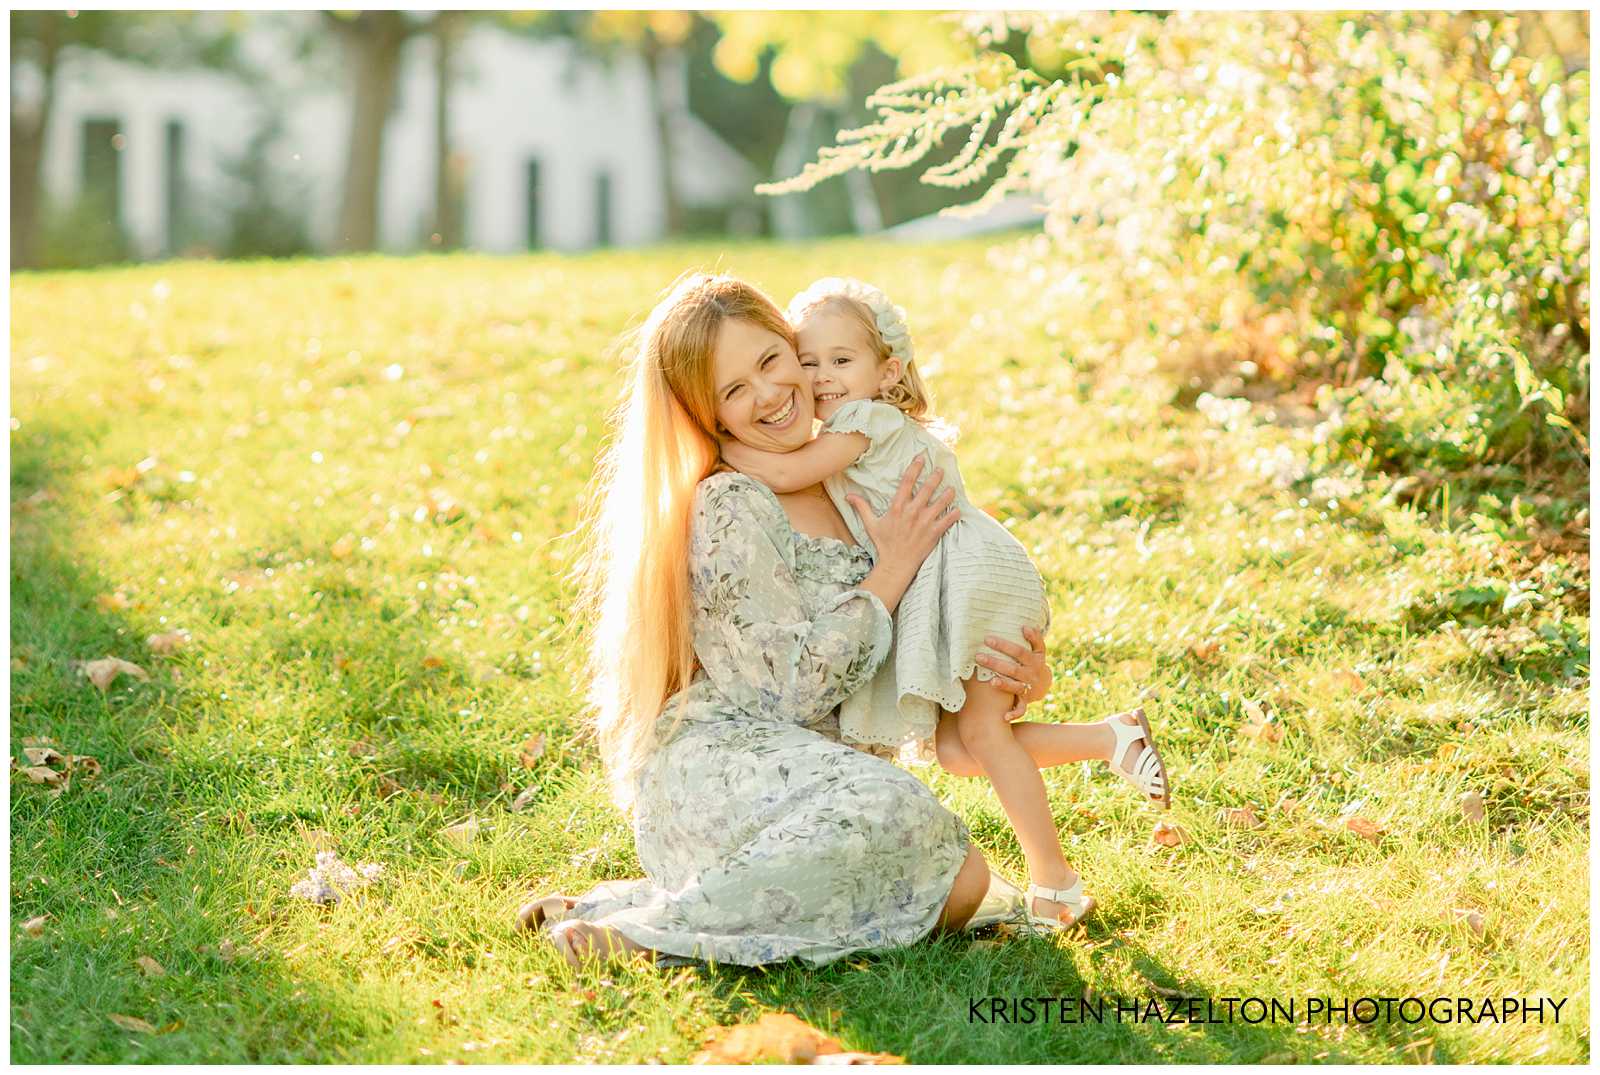 Toddler daughter hugging her mom! Both are wearing light blue dresses and standing on grassy hill